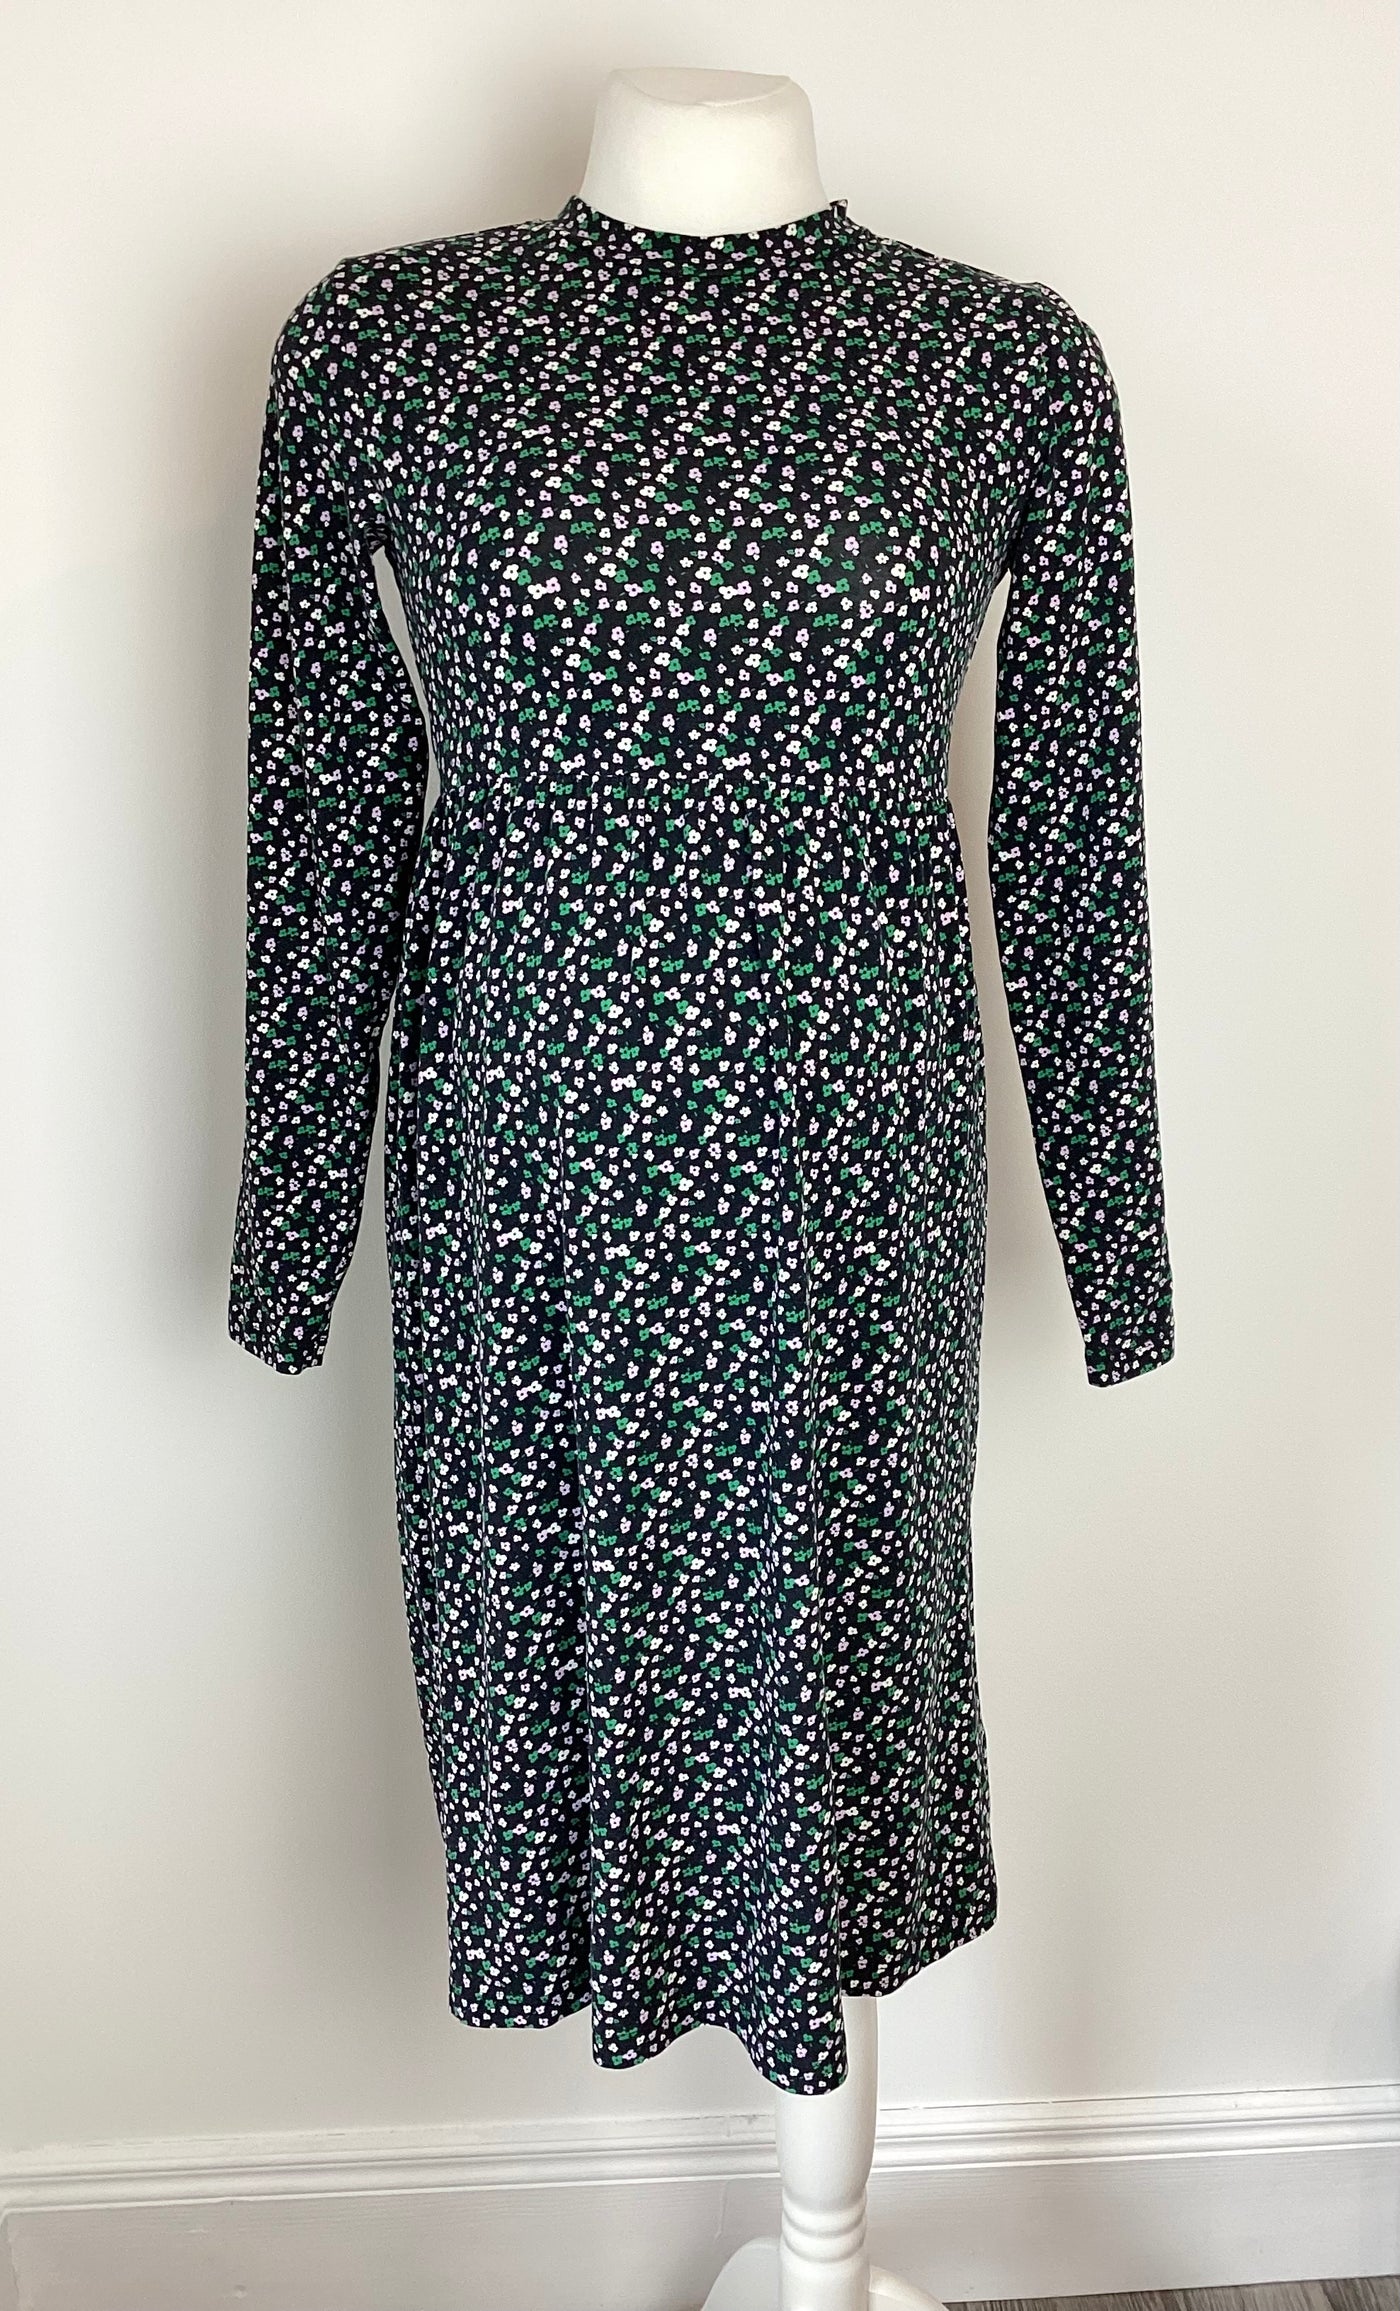 Mamalicious black, green & lilac floral long sleeved dress - Size S (Approx UK 8/10)